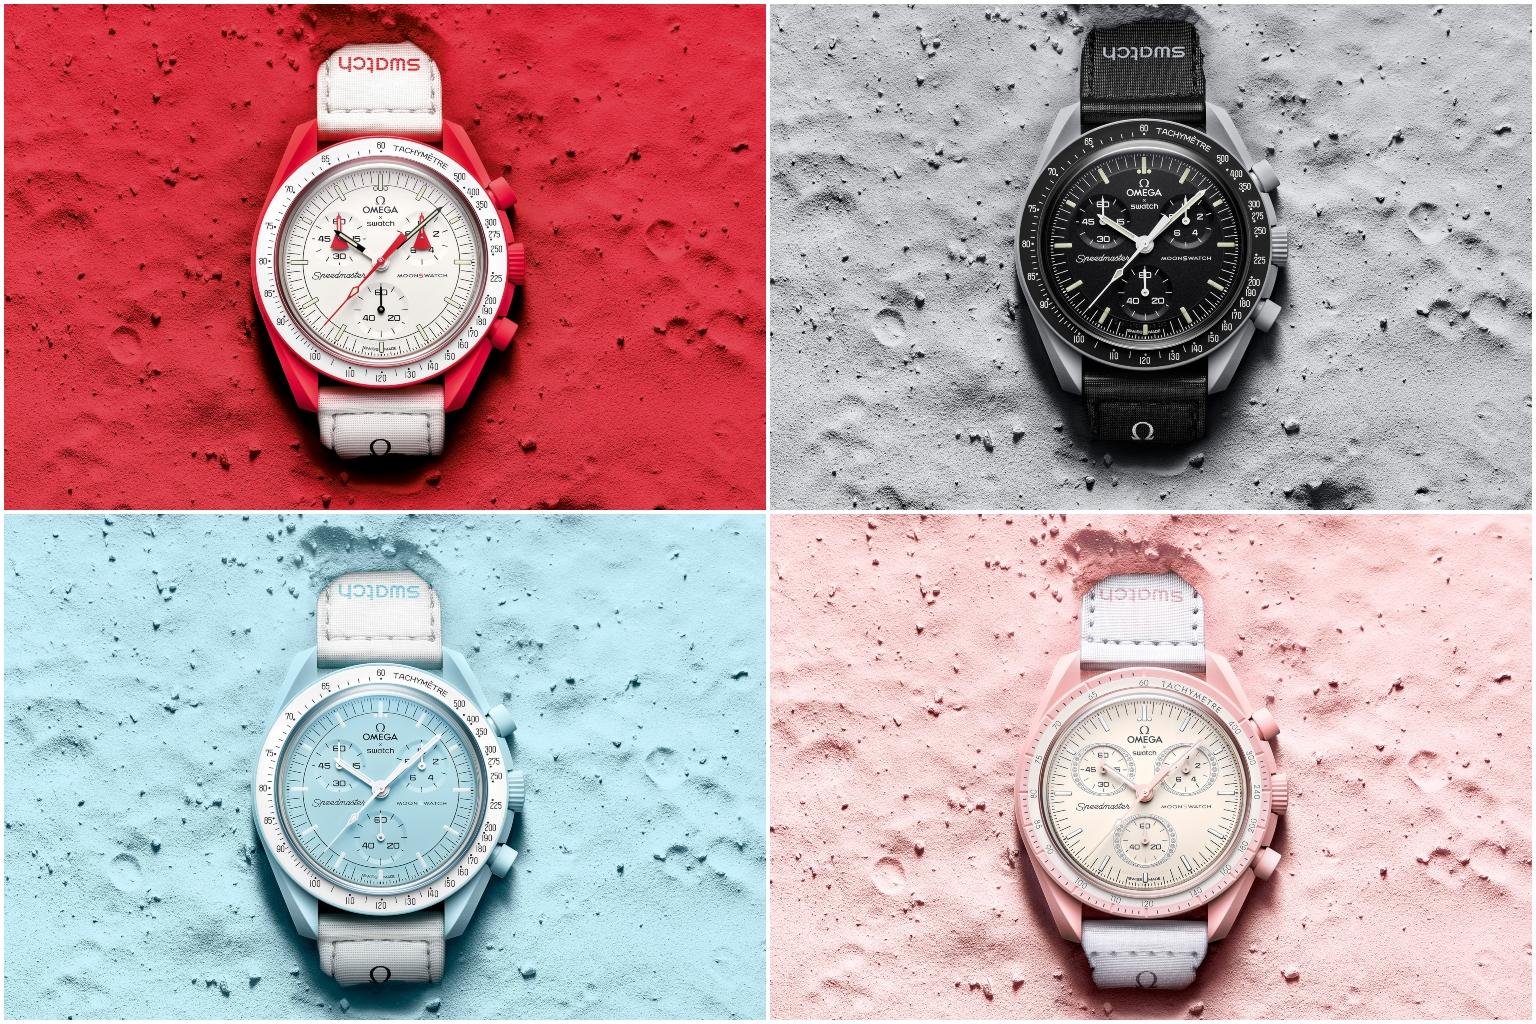 Omega x Swatch collection draws snaking queues in Singapore a10